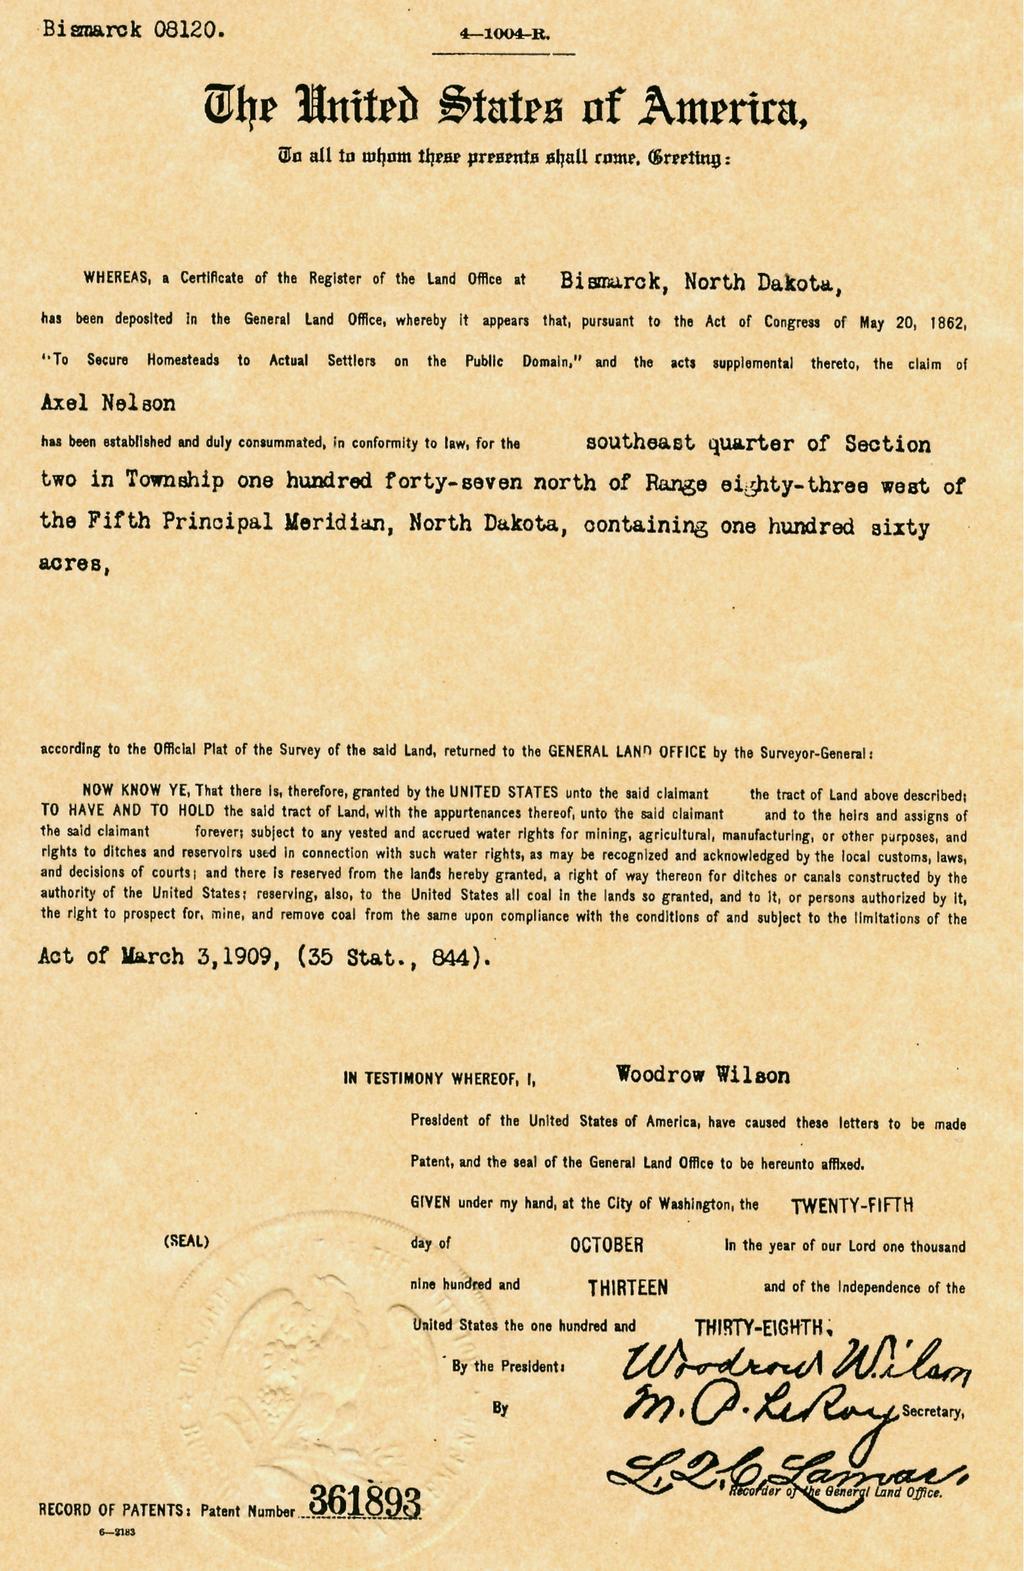 The Land Patent awarded to Axel Nelson on October 25, 1913, signed by United